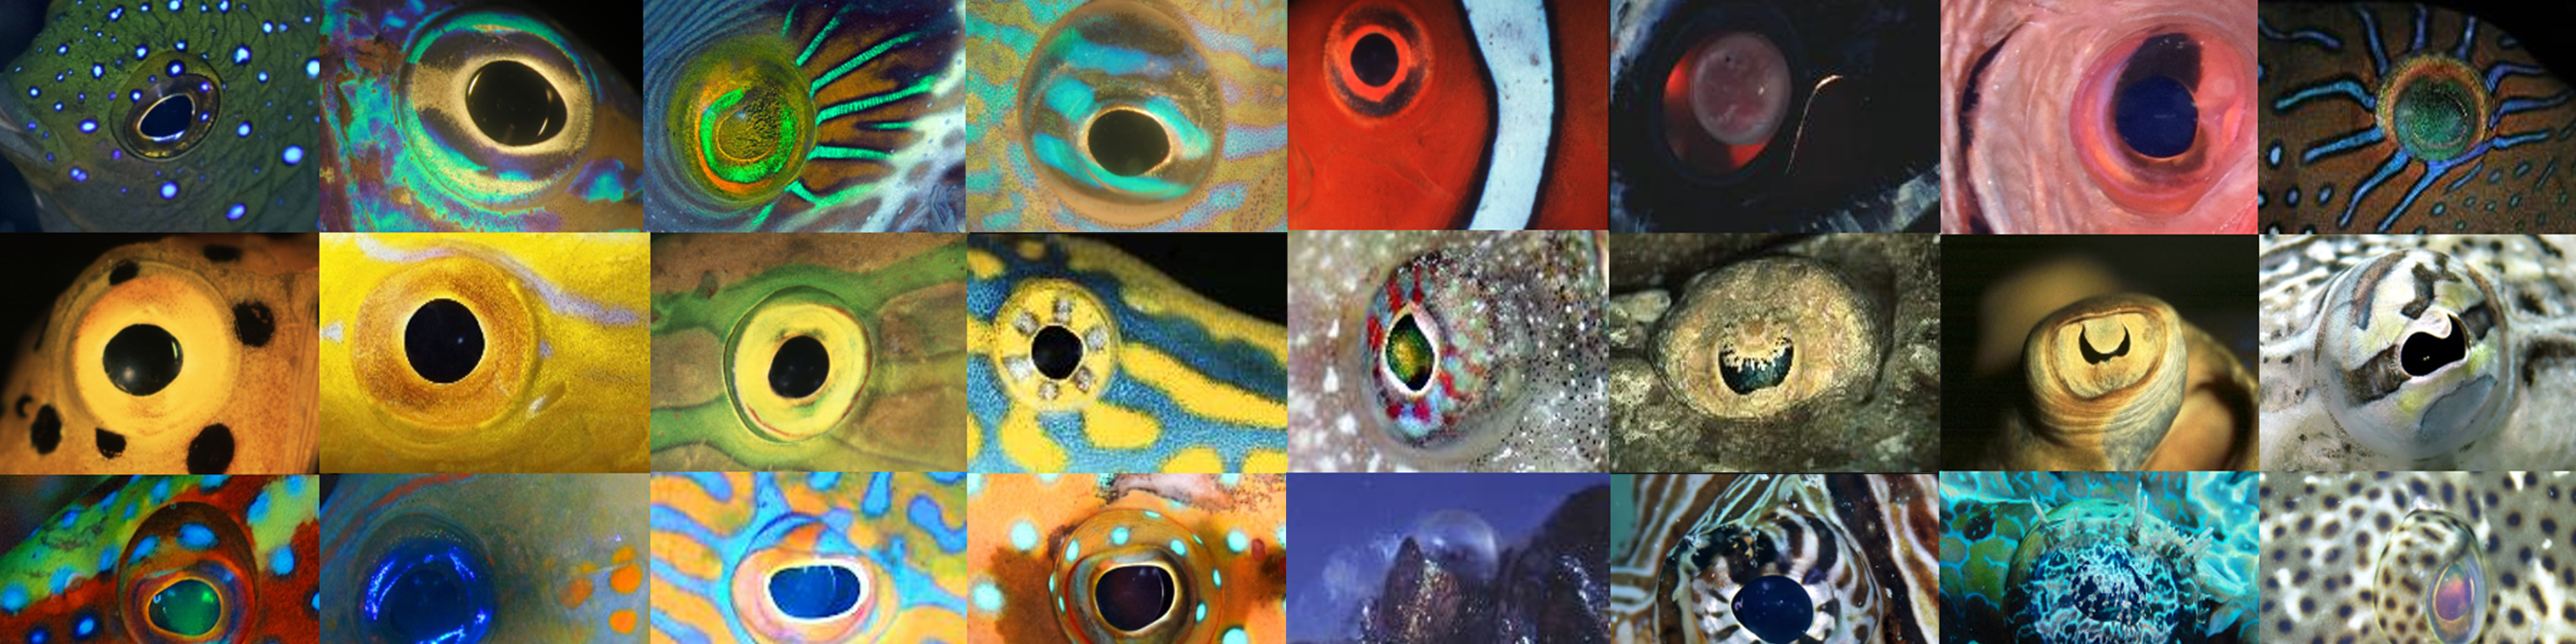 All eyes on the reef - Curious